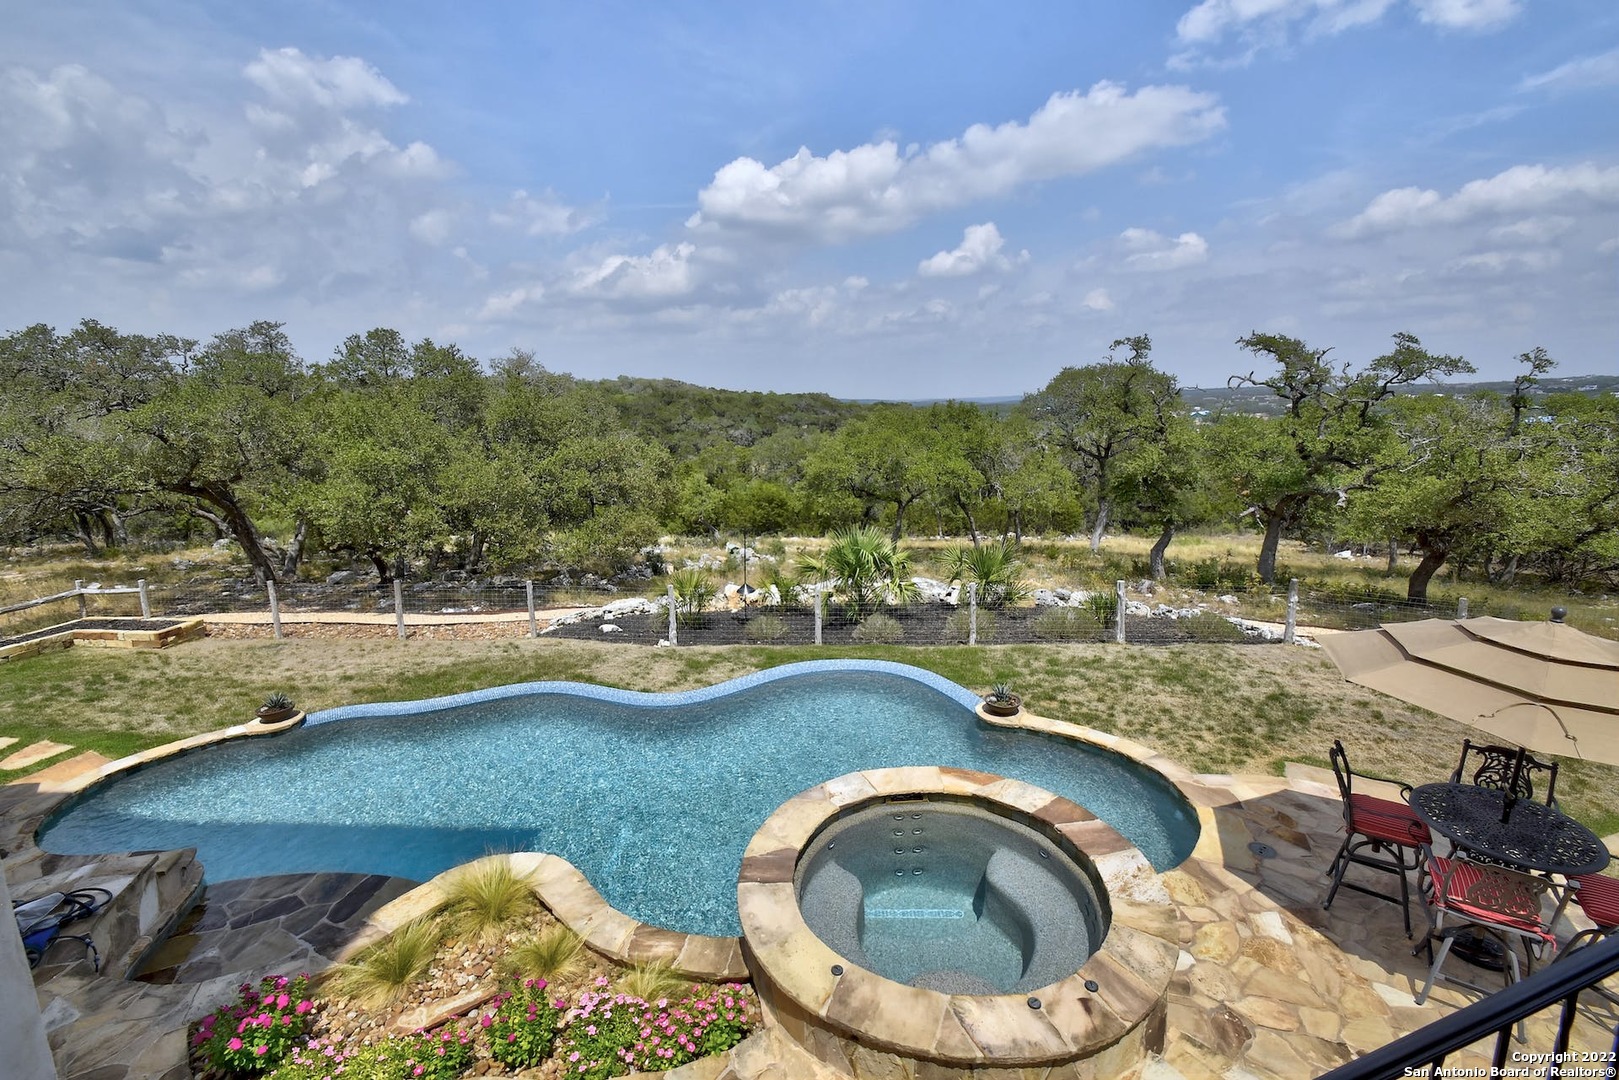 Welcome to the best of refined French Country elegance set high-atop our glorious Texas Hill Country. This magnificent River Hills Custom Home is positioned expertly on 2 picturesque acres so each room is graced with views that never end. This home's design strikes a balance between beauty and comfort with its intentional use of natural materials - exposed wood beams, grand stone fireplaces, decorative brick walls, plantation shutters, handmade wrought iron railings and expert craftmanship that is seen throughout this open concept floor plan. As soon as you enter you will be greeted by the stunning views through 6 sets of French Doors and floor to ceiling windows where the natural light streams in to your primary living area featuring 25 ft soaring ceilings accented with a soft neutral palette. This 4 Bedroom/5 Bath home was thoughtfully built so that you and your guests would have a wonderful experience every minute of every day - A wine cellar with storage for over 200 bottles of your favorite vintages, a guest/mother-in-law suite that has a sitting area/kitchenette and ensuite bath with a dual sided, glass fireplace and a separate, private entrance; the Master Suite was created for your ultimate comfort featuring access to an outdoor, 50 foot long covered patio, a coffee/beverage bar, a master closet with an oversized, built-in dresser, shelves for the ultimate storage and a make-up vanity so your daily routine is made easy. And, tucked away in the suite is a secluded Exercise Room that could also be used as a 2nd Office, Studio or Nursery.   When you walk up the exquisite wooden, spiral stairs you will find a fun filled game room with enough space to enjoy playing or watching your games - pool, poker, football or basketball with a full wet bar for you and your guests to enjoy. This floor has 2 additional generously sized bedrooms - one with an ensuite and the 4th bedroom that is currently being used as a media room.  Of course, you'll  want to extend your entertaining to the outside  where you'll love how easy it is to spend hours grilling your favorites in the outdoor kitchen, swimming in the cool, sparkling pool or relaxing in the heated spa.   With the very best views in the entire neighborhood, once you step inside this Hill Country Masterpiece, you will never want to leave.